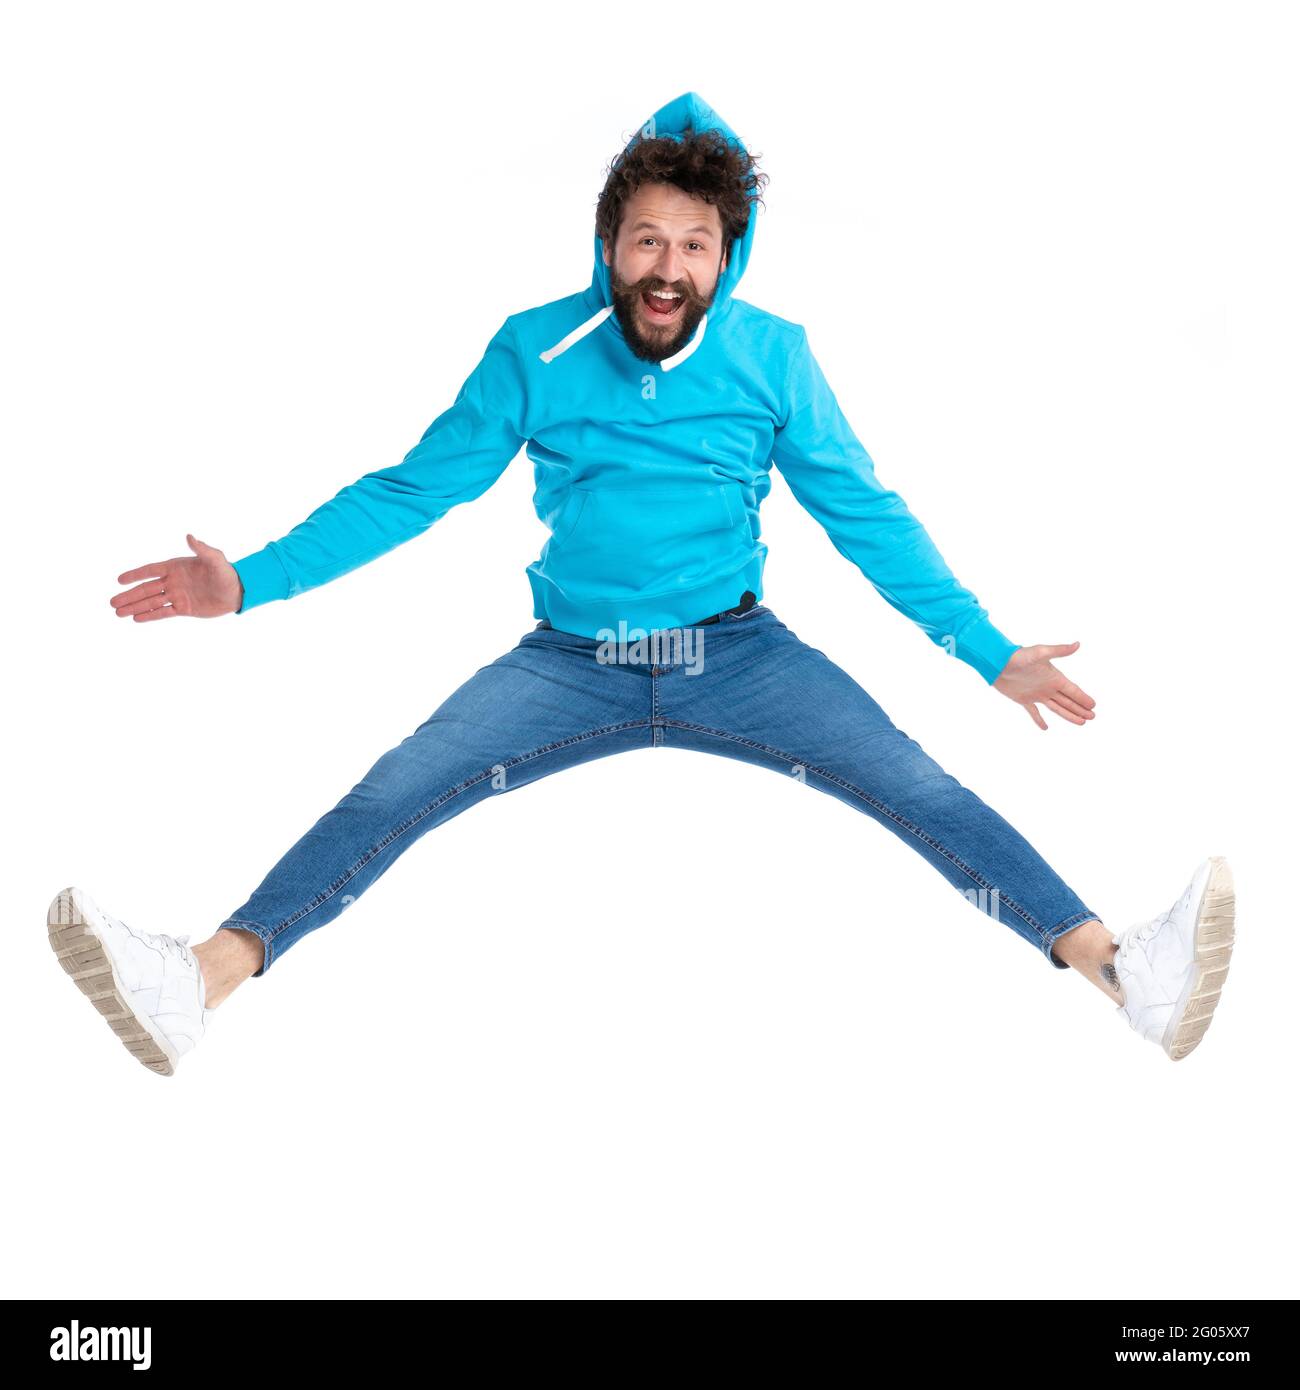 happy young guy in blue hoodie dynamically jumping, having fun and smiling while posing isolated on white background in studio Stock Photo